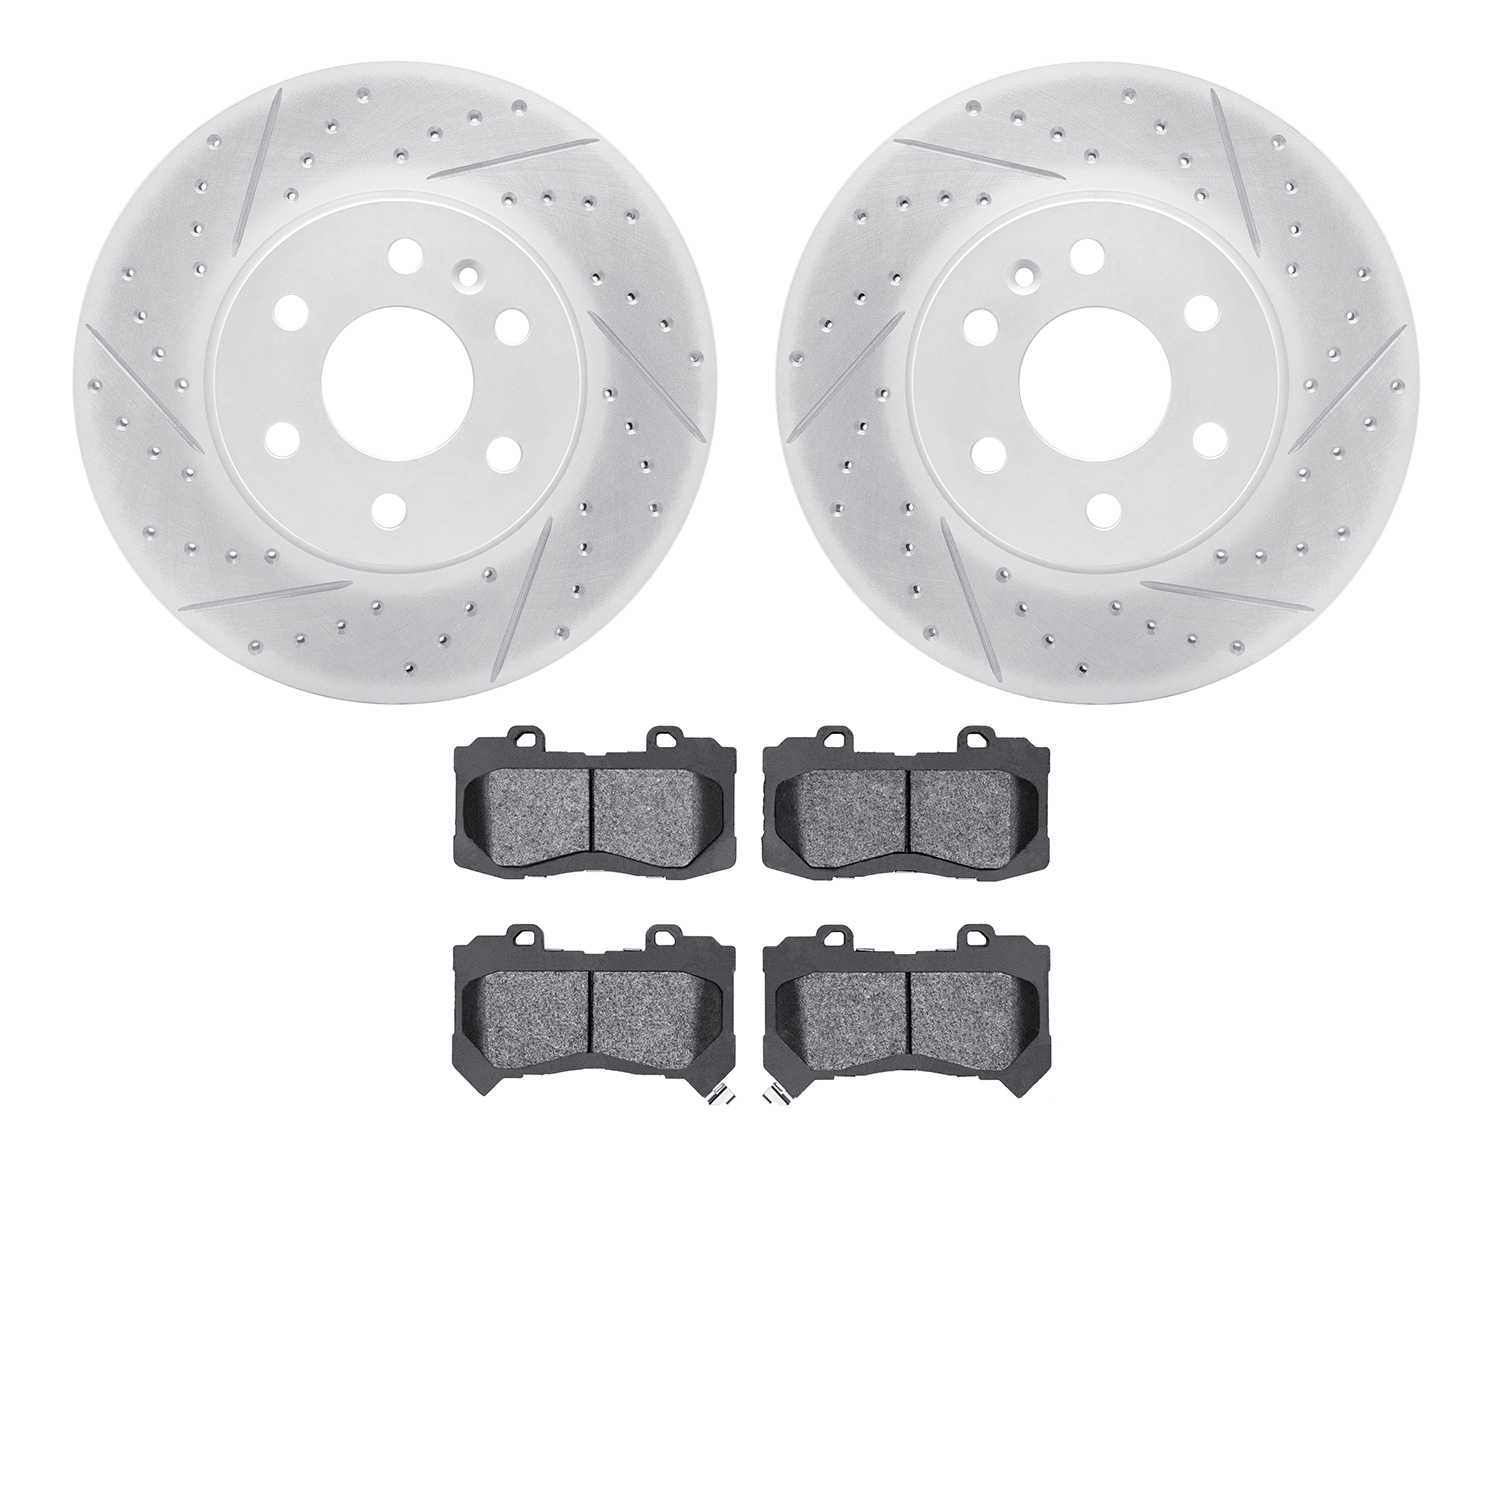 2402-48033 Geoperformance Drilled/Slotted Brake Rotors with Ultimate-Duty Brake Pads Kit, 2015-2020 GM, Position: Front